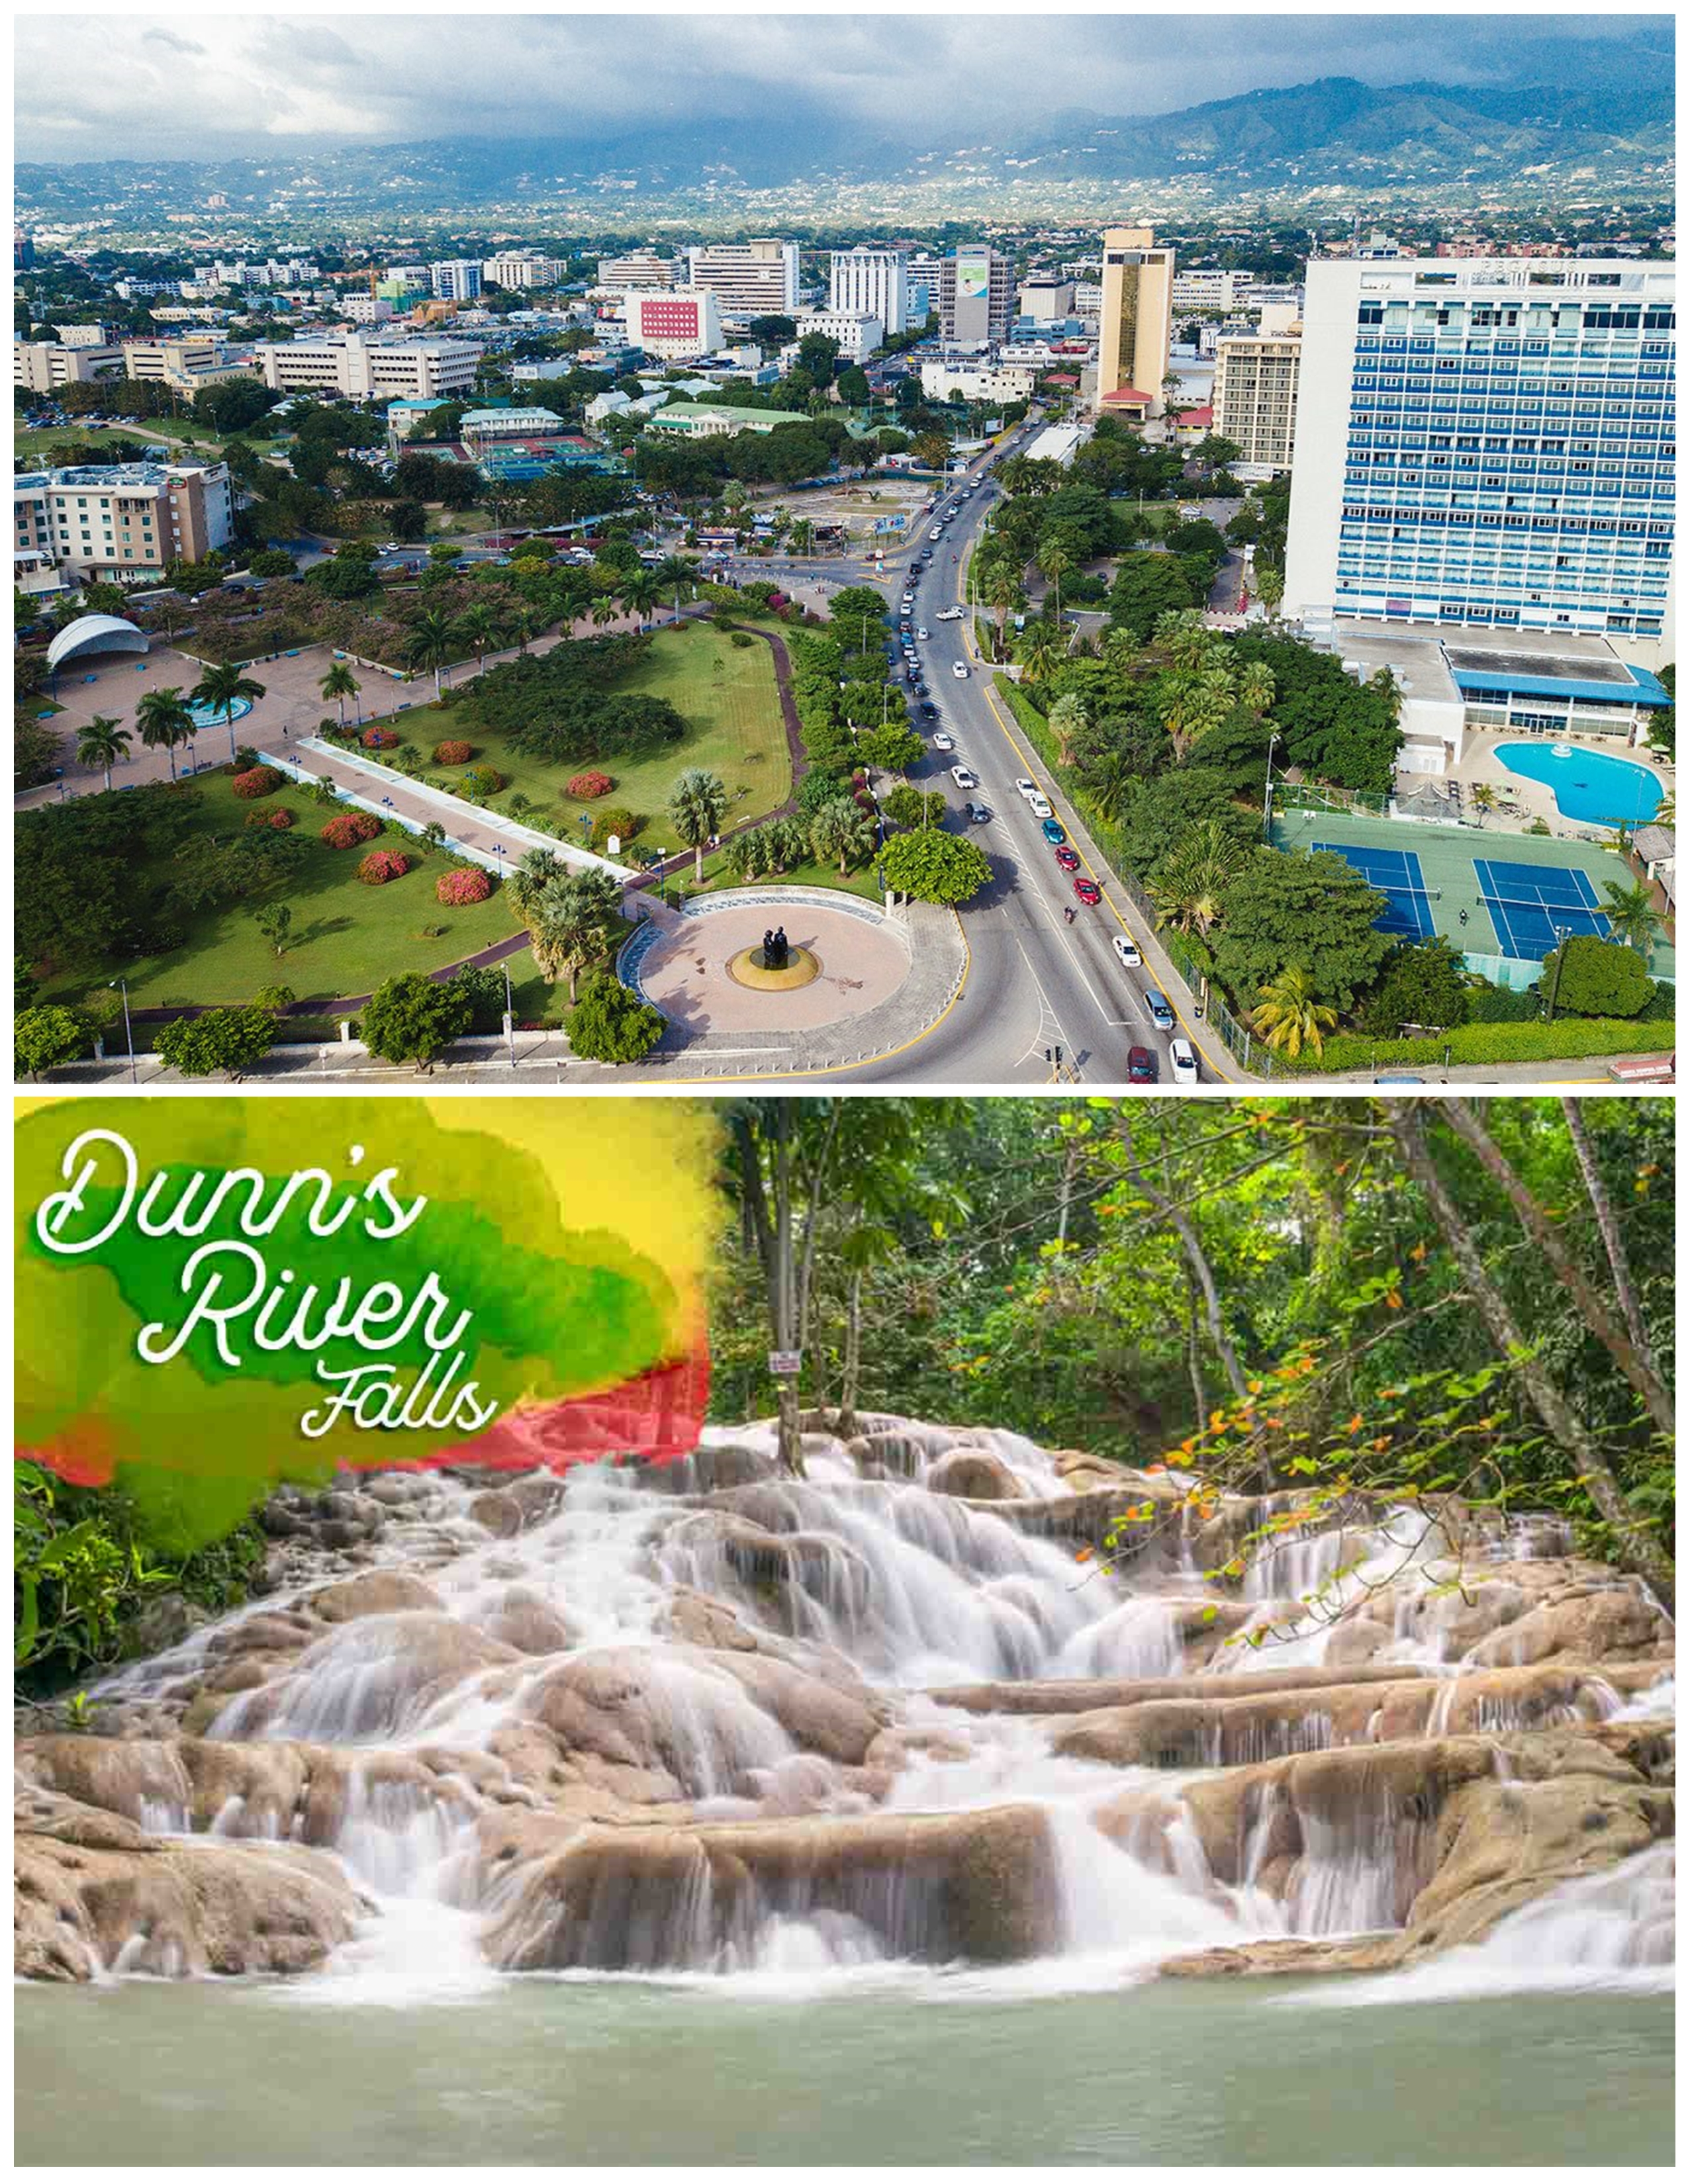 From New Kingston & Liguanea Area - Dunn's River Falls (Round Trip)